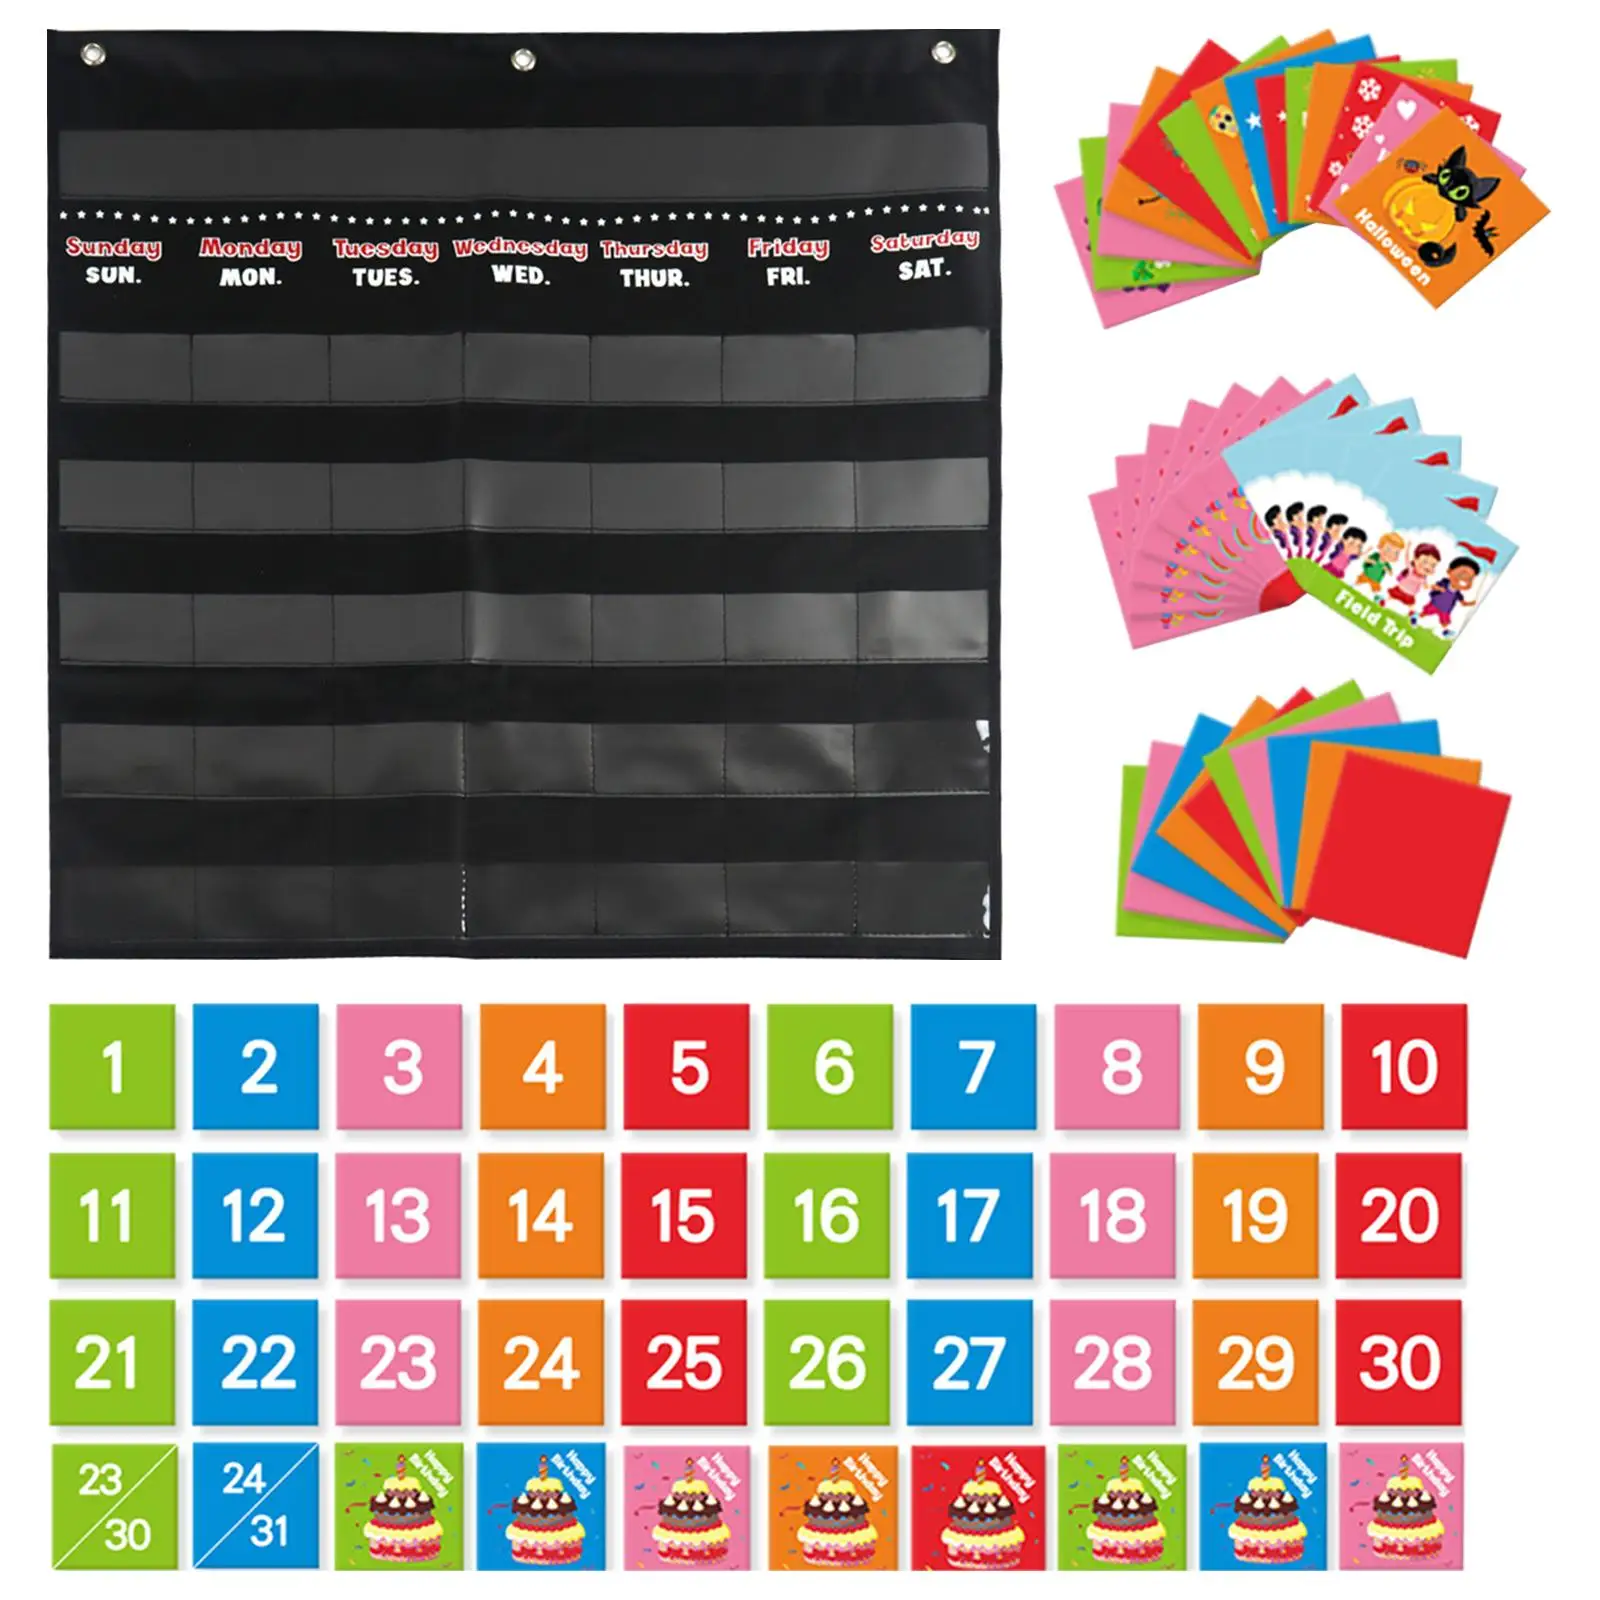 Calendar Pocket Chart Kids Toddlers Learning Materials for Homeschool, Early Learning Supplies